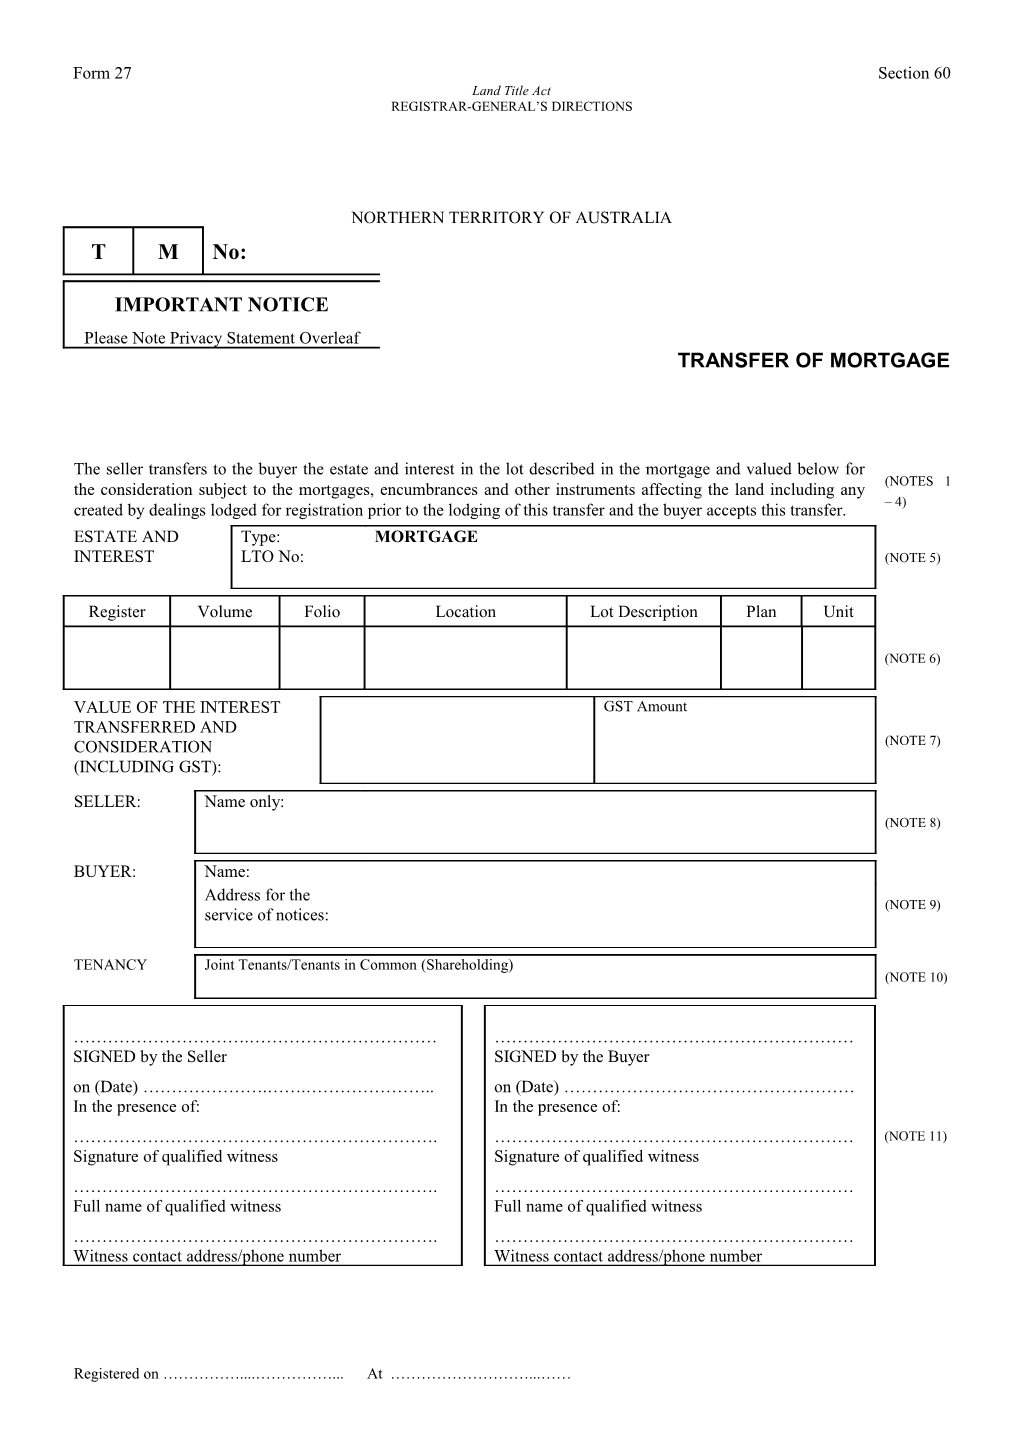 Form No. 27 - Transfer of Mortgage